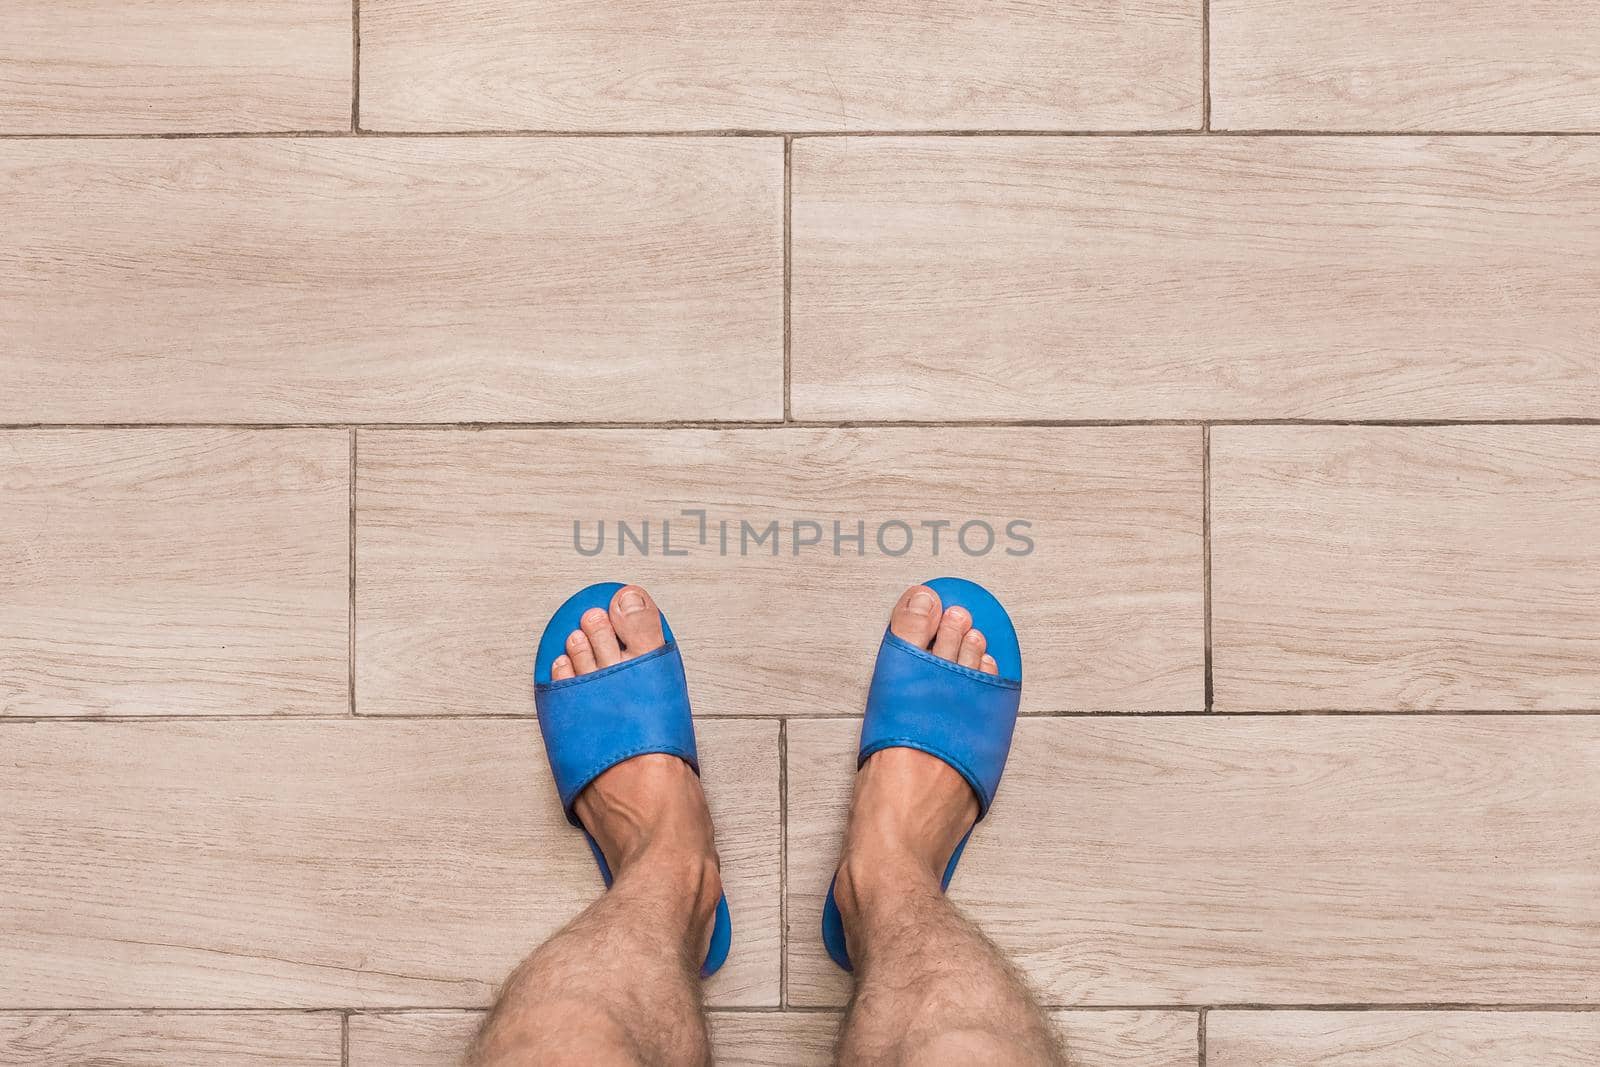 Men's bare feet in blue home slippers stand on a light laminate floor tile background, view from above.